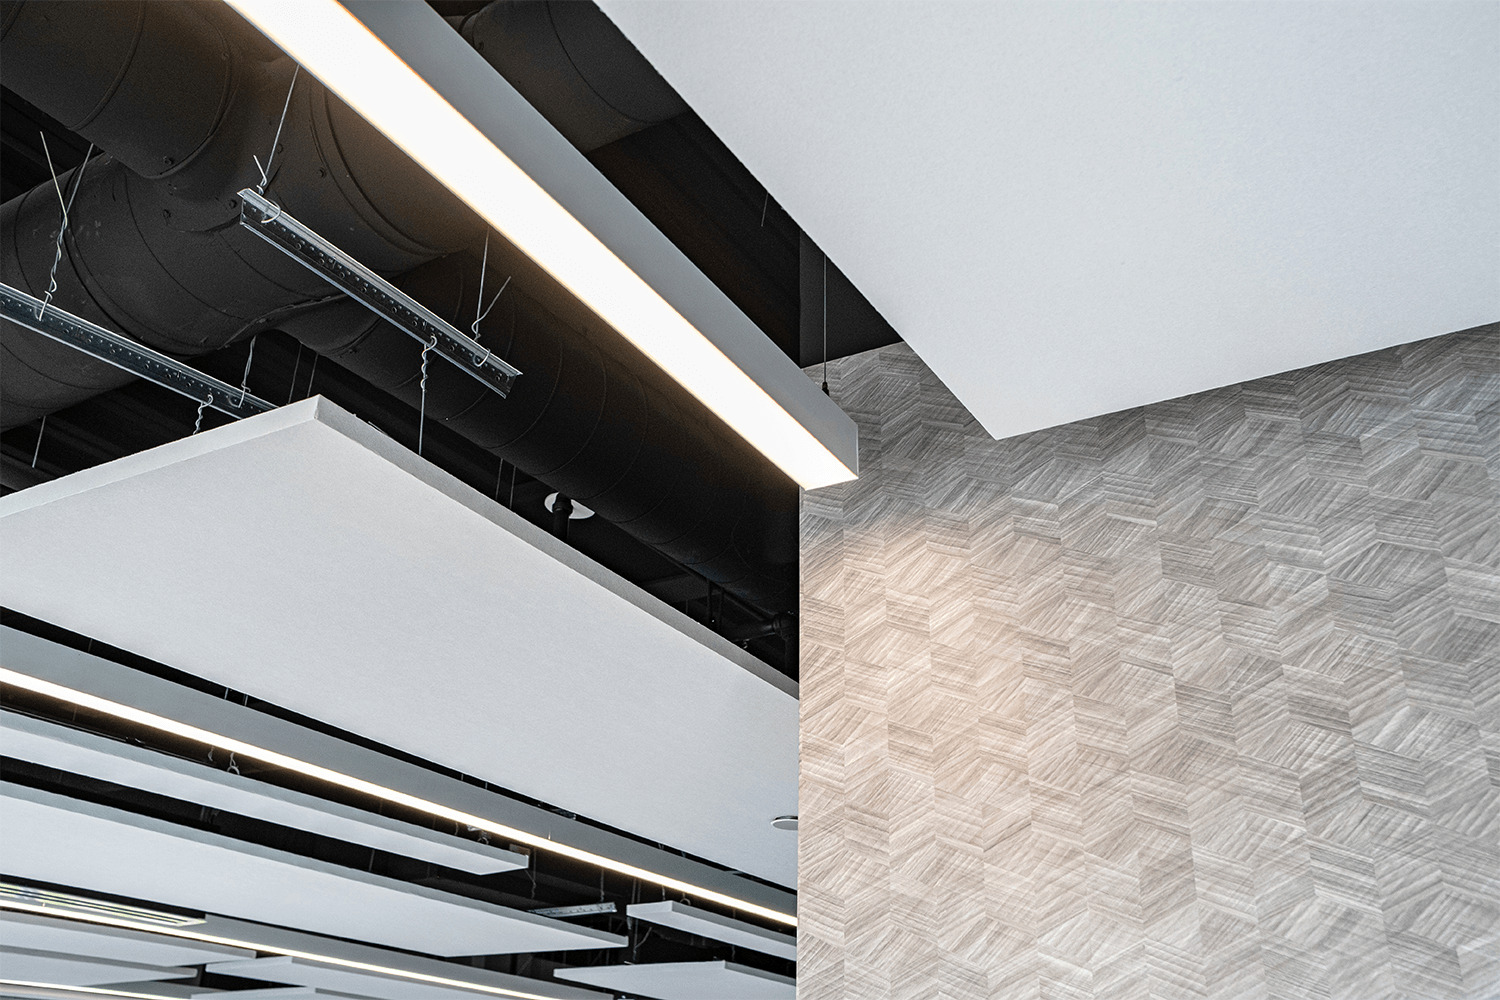 geometric, hanging ceiling panels and light fixtures